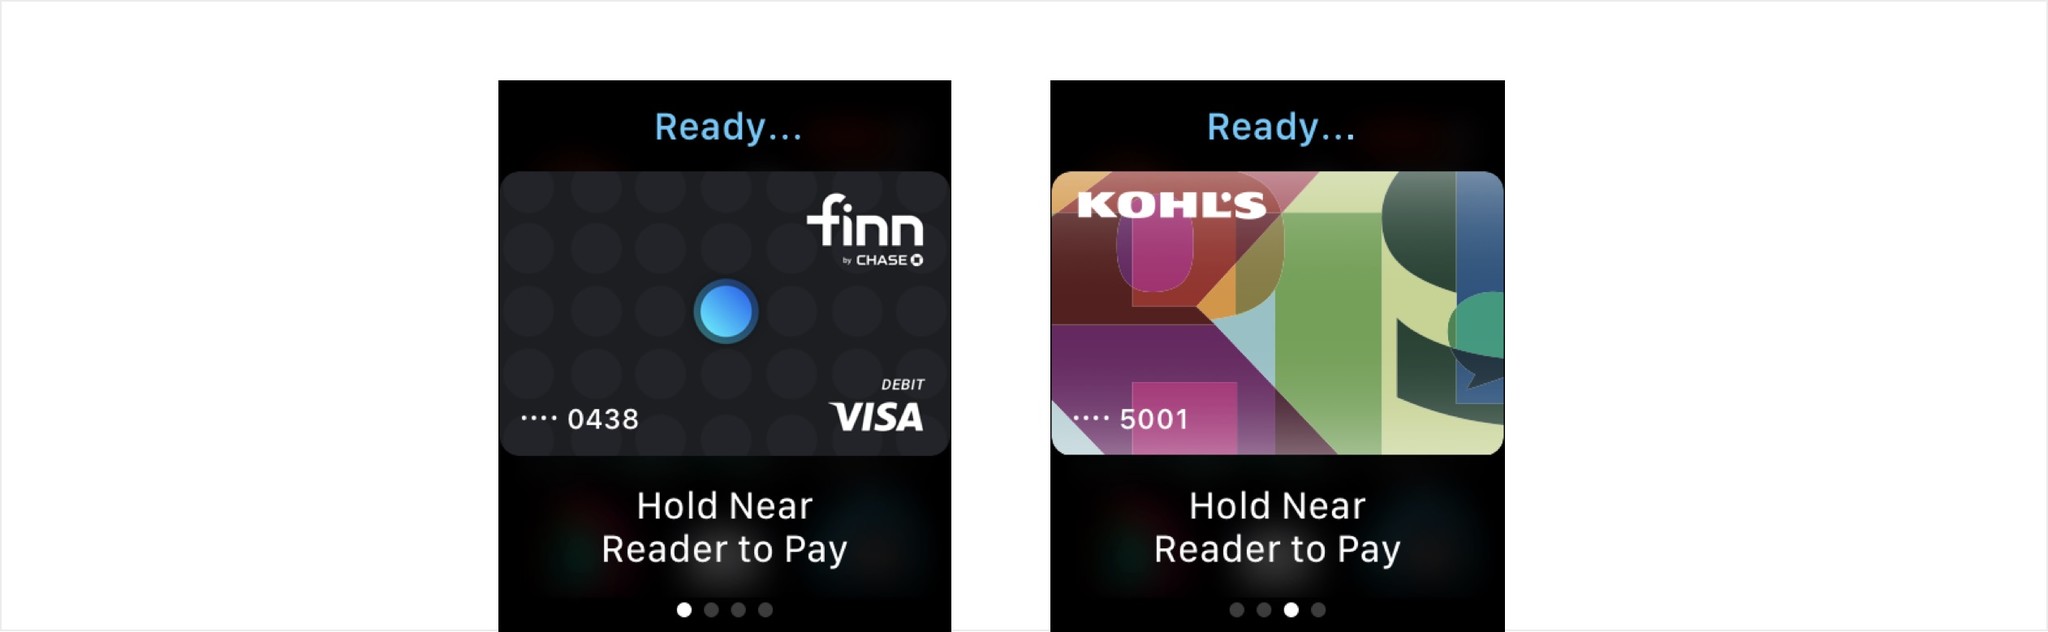 To use Apple Pay on Apple Watch, double-click the side button and hold the display near the contactless reader. Confirm payment on the screen. To select a different card, swipe left or right, then select a new card from your Apple Watch face.